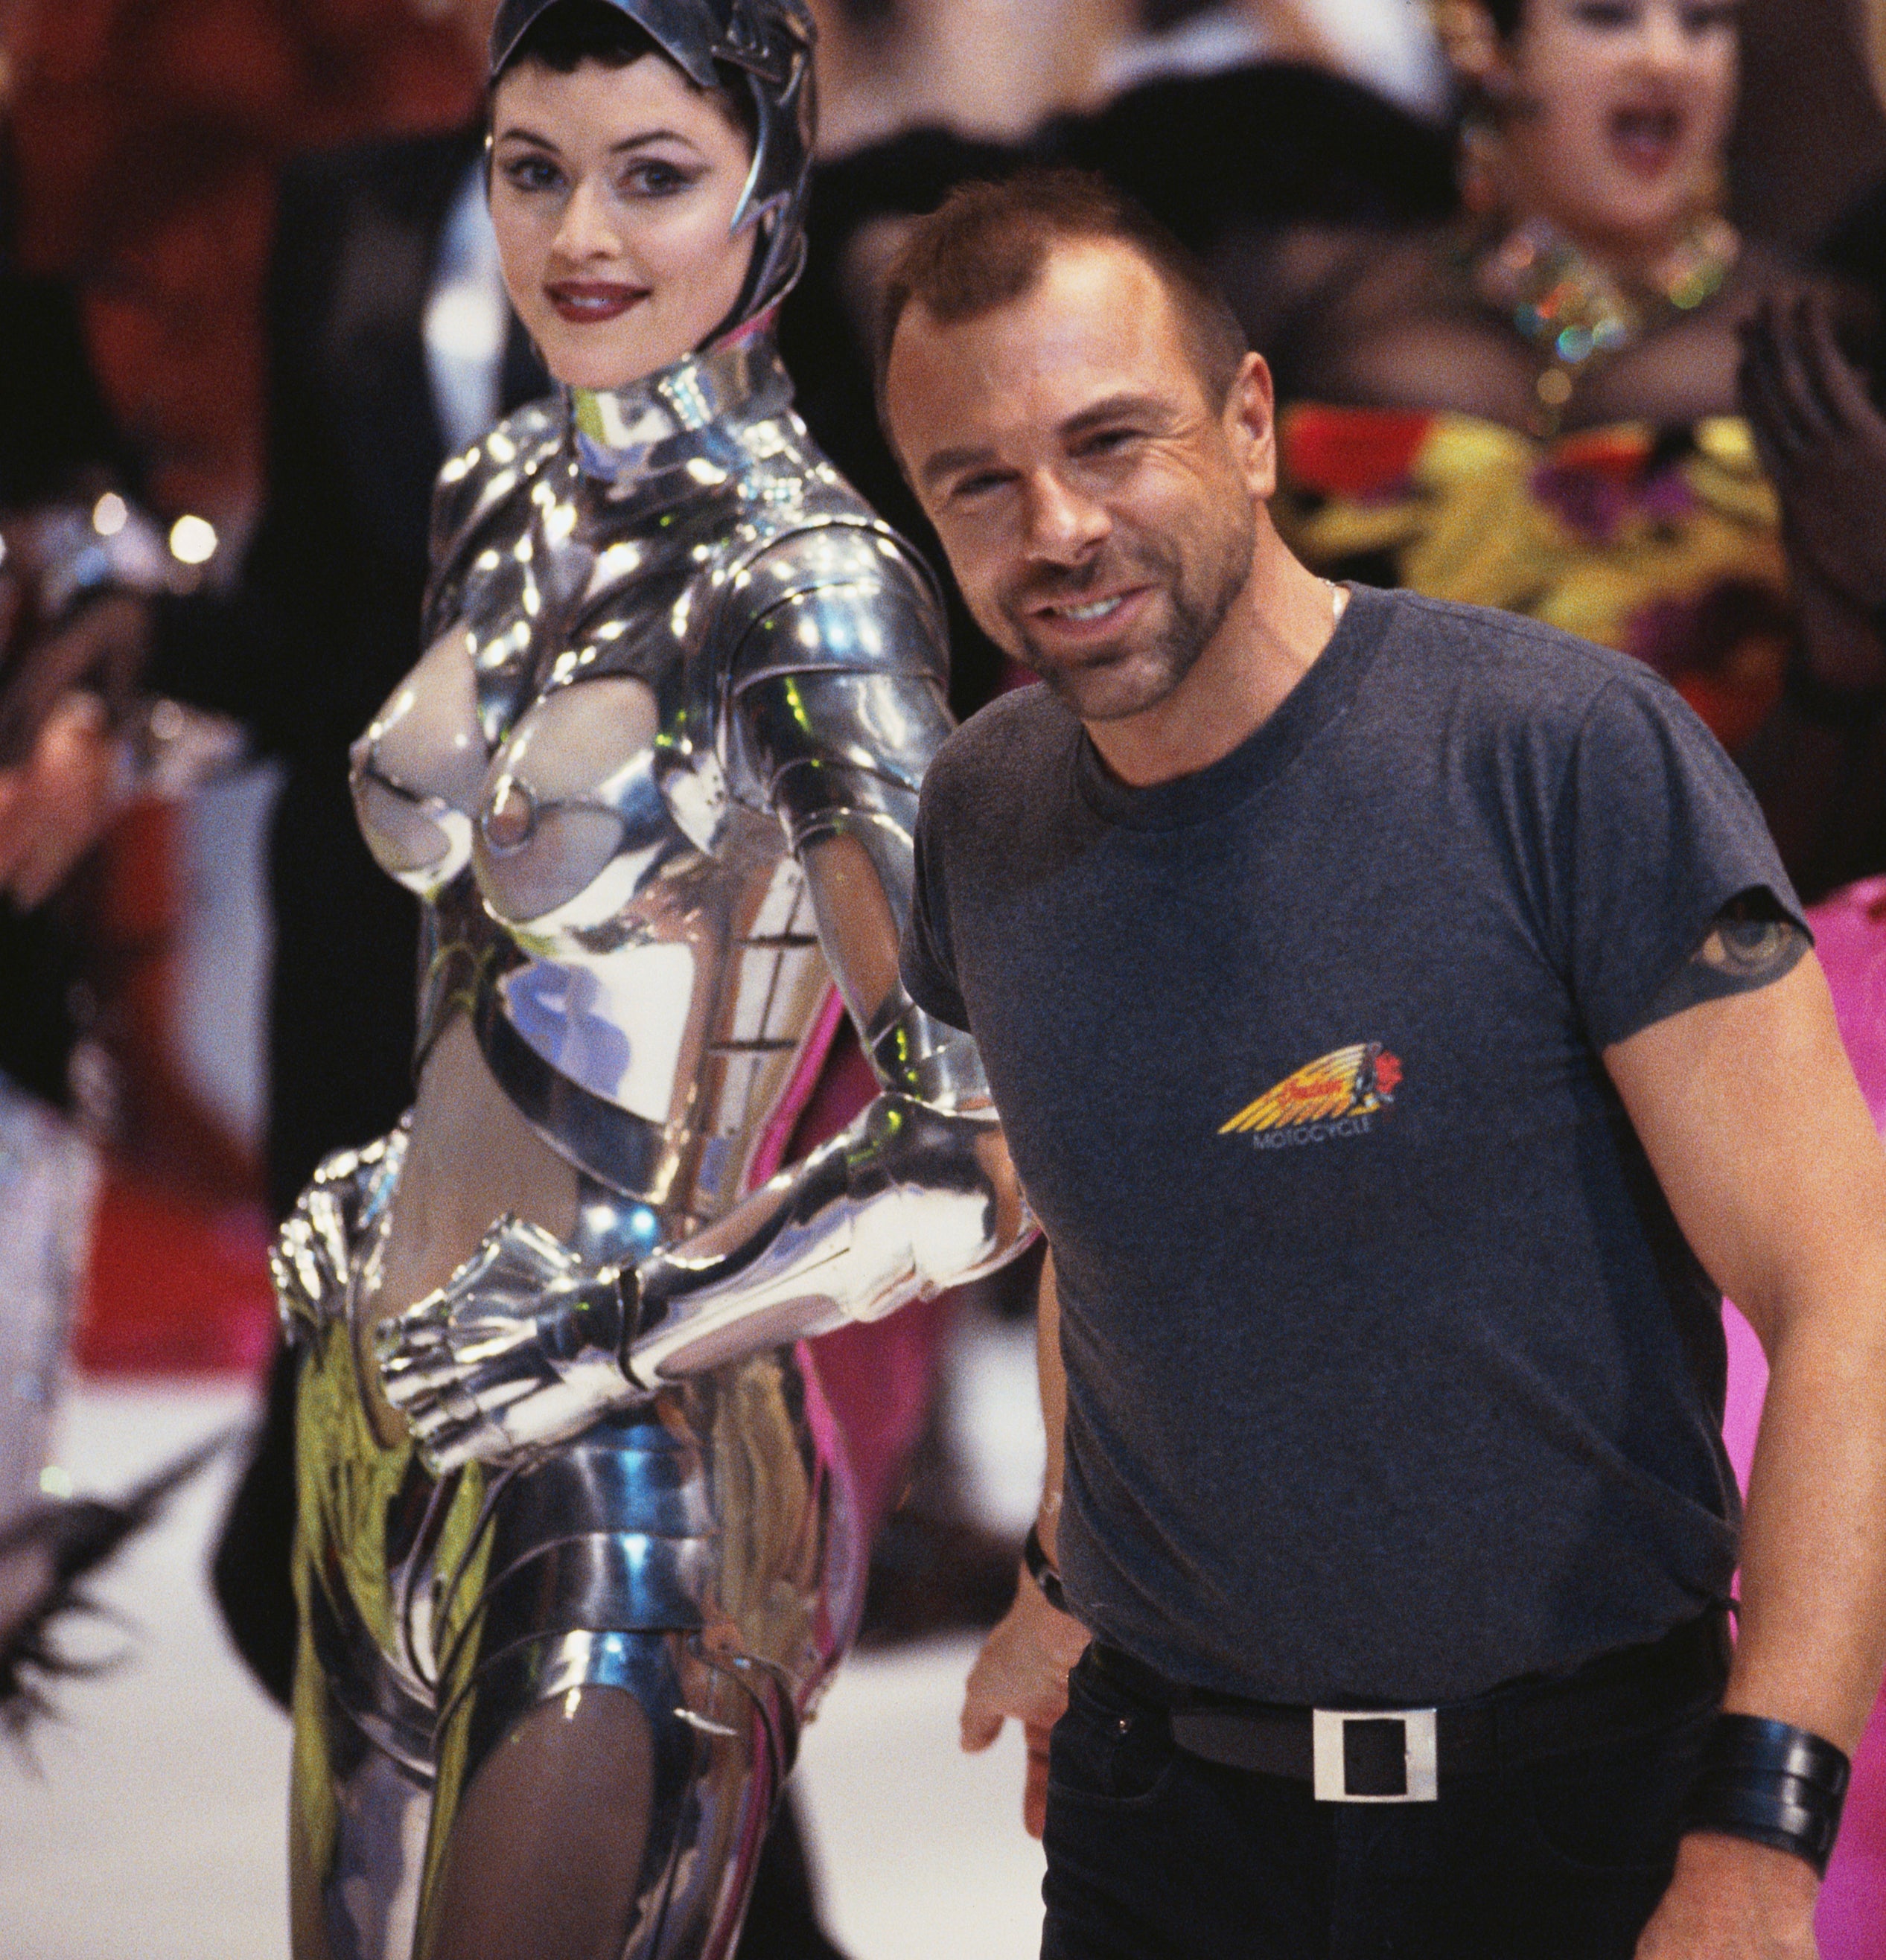 Manfred Thierry Mugler with models in avant-garde outfits, one in metallic attire, on runway